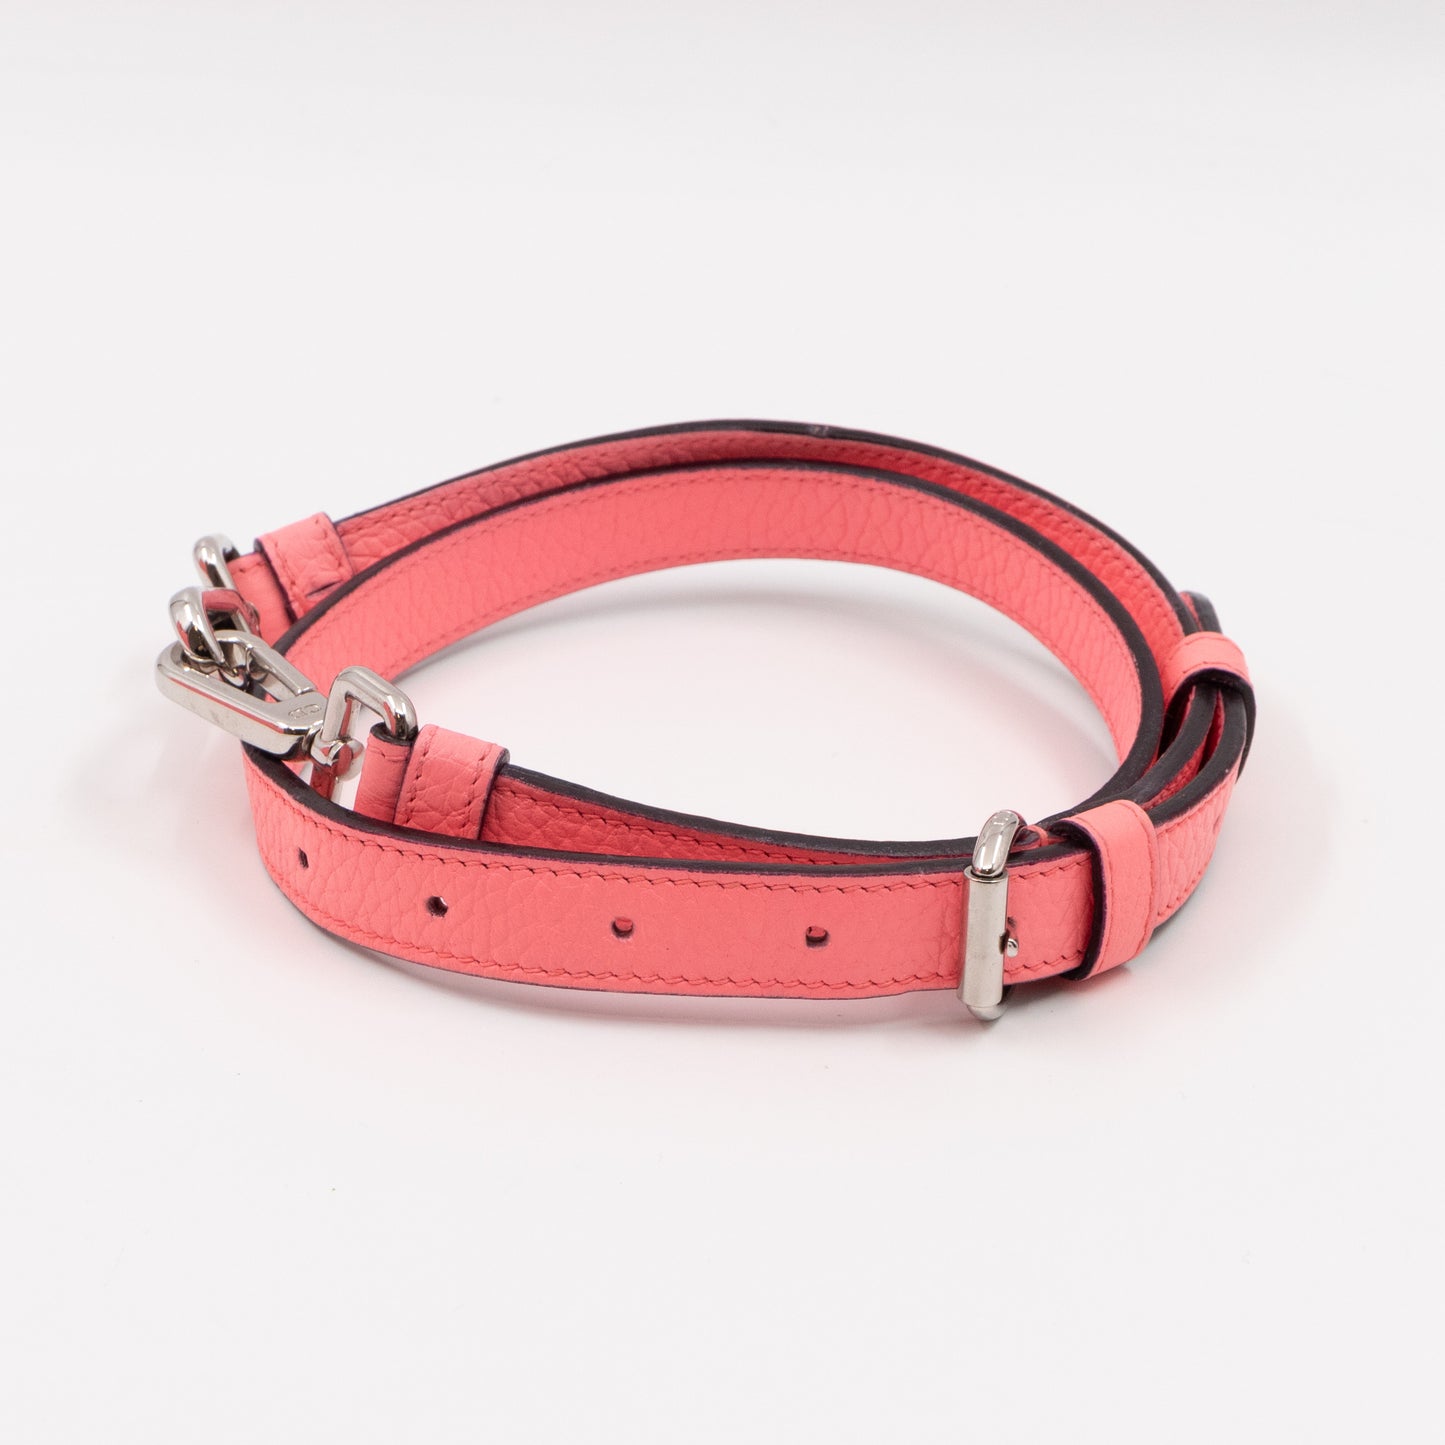 Diorissimo Small Light Pink Leather